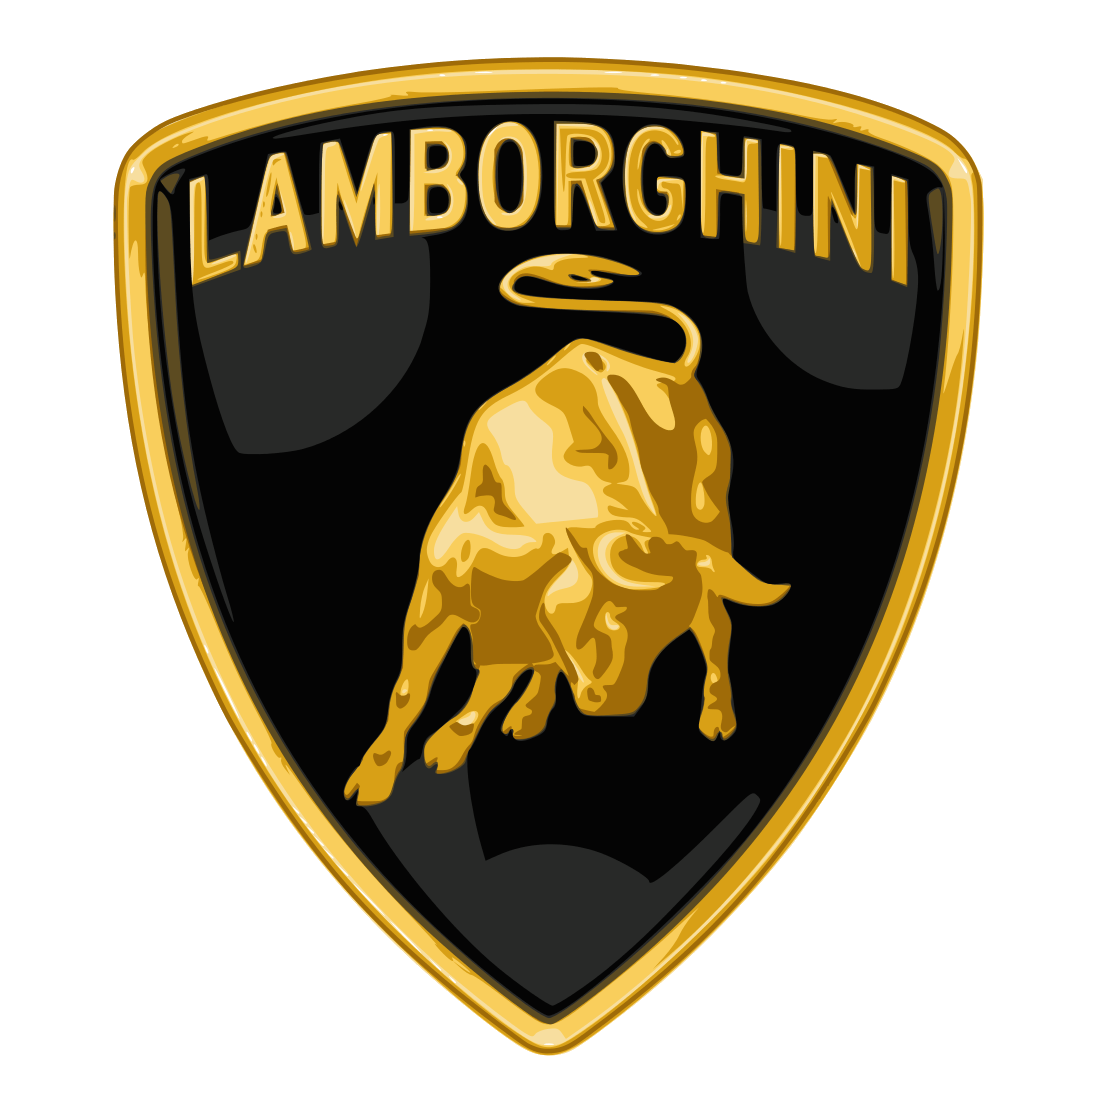 Lamborghinin Logo - Lamborghini Logo, Lamborghini Car Symbol Meaning and History | Car ...